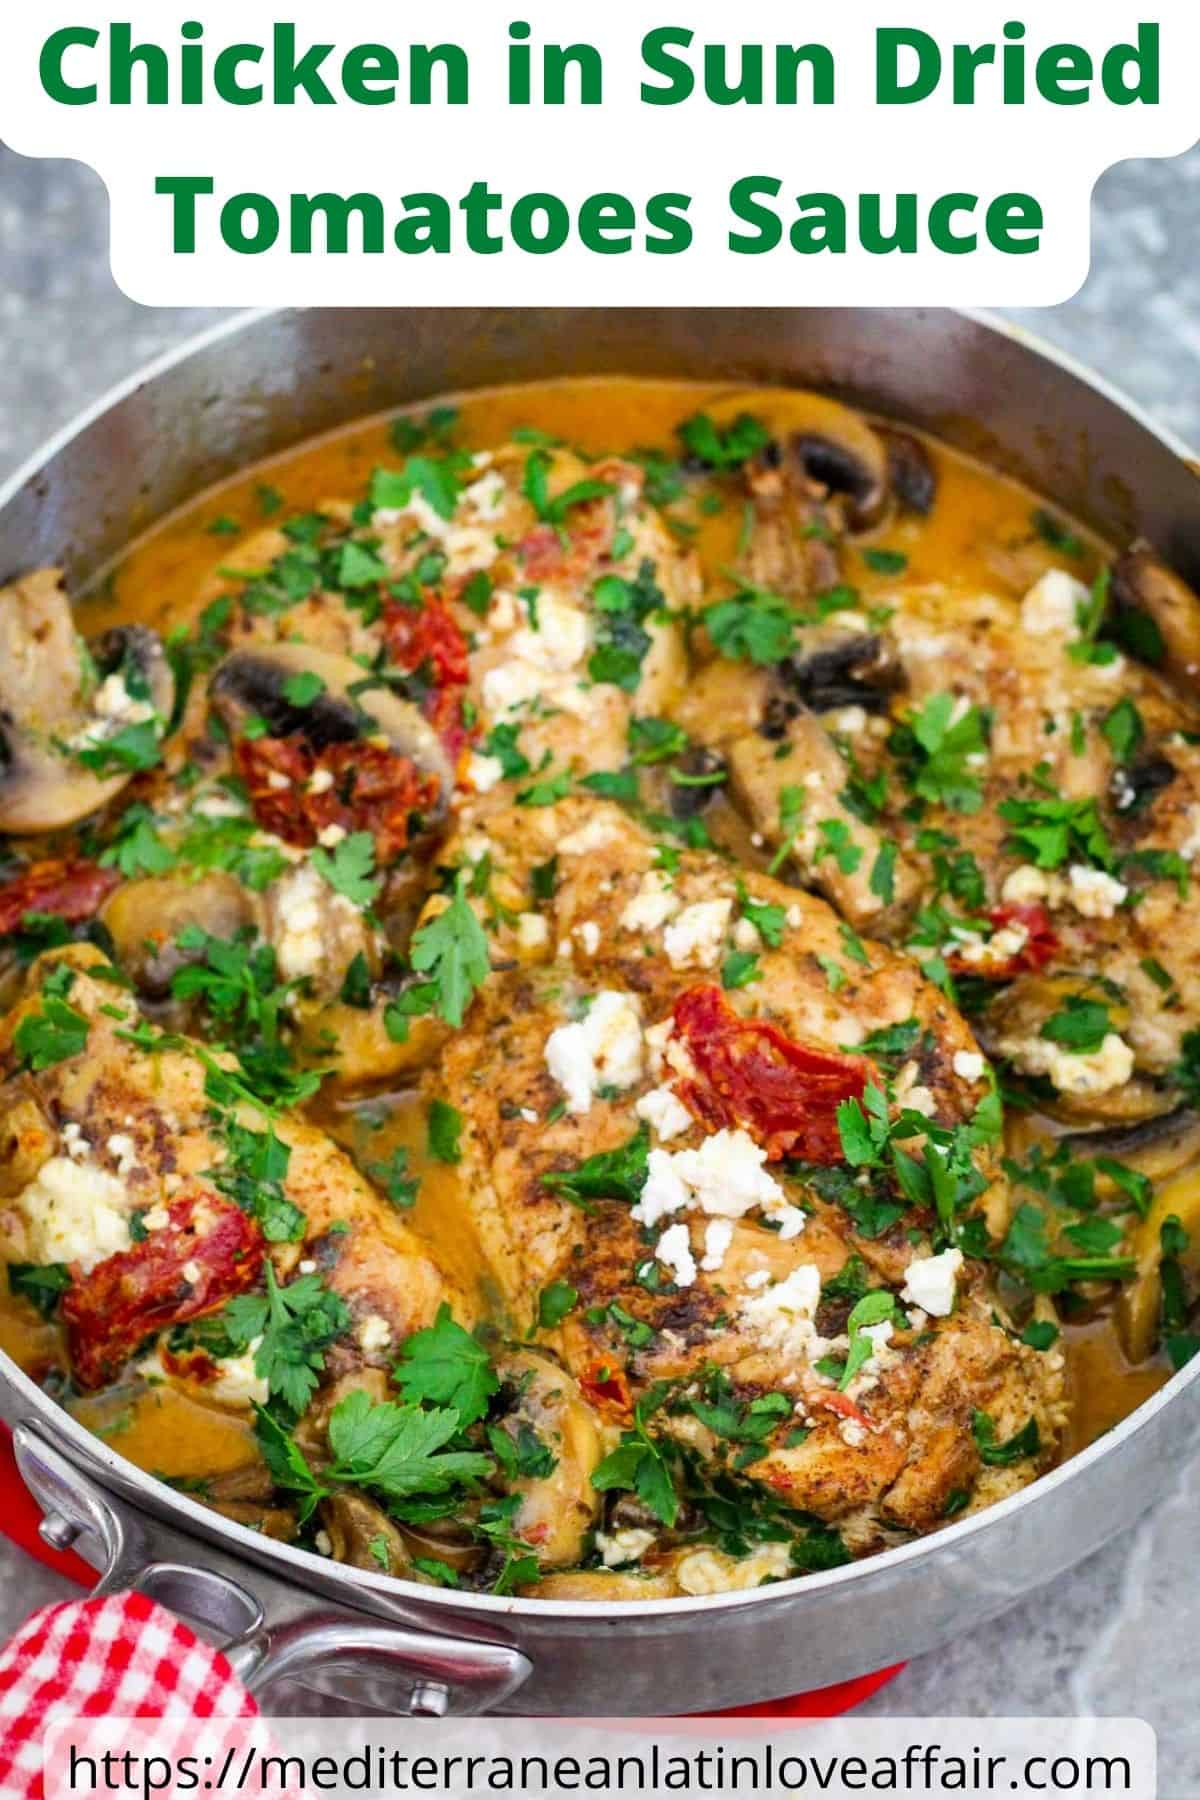 An image prepared for Pinterest. It shows a picture of the cooked chicken in creamy sun dried tomatoes sauce with mushrooms. Food is garnished with feta and parsley. There's a title bar on top and a website link at the bottom.